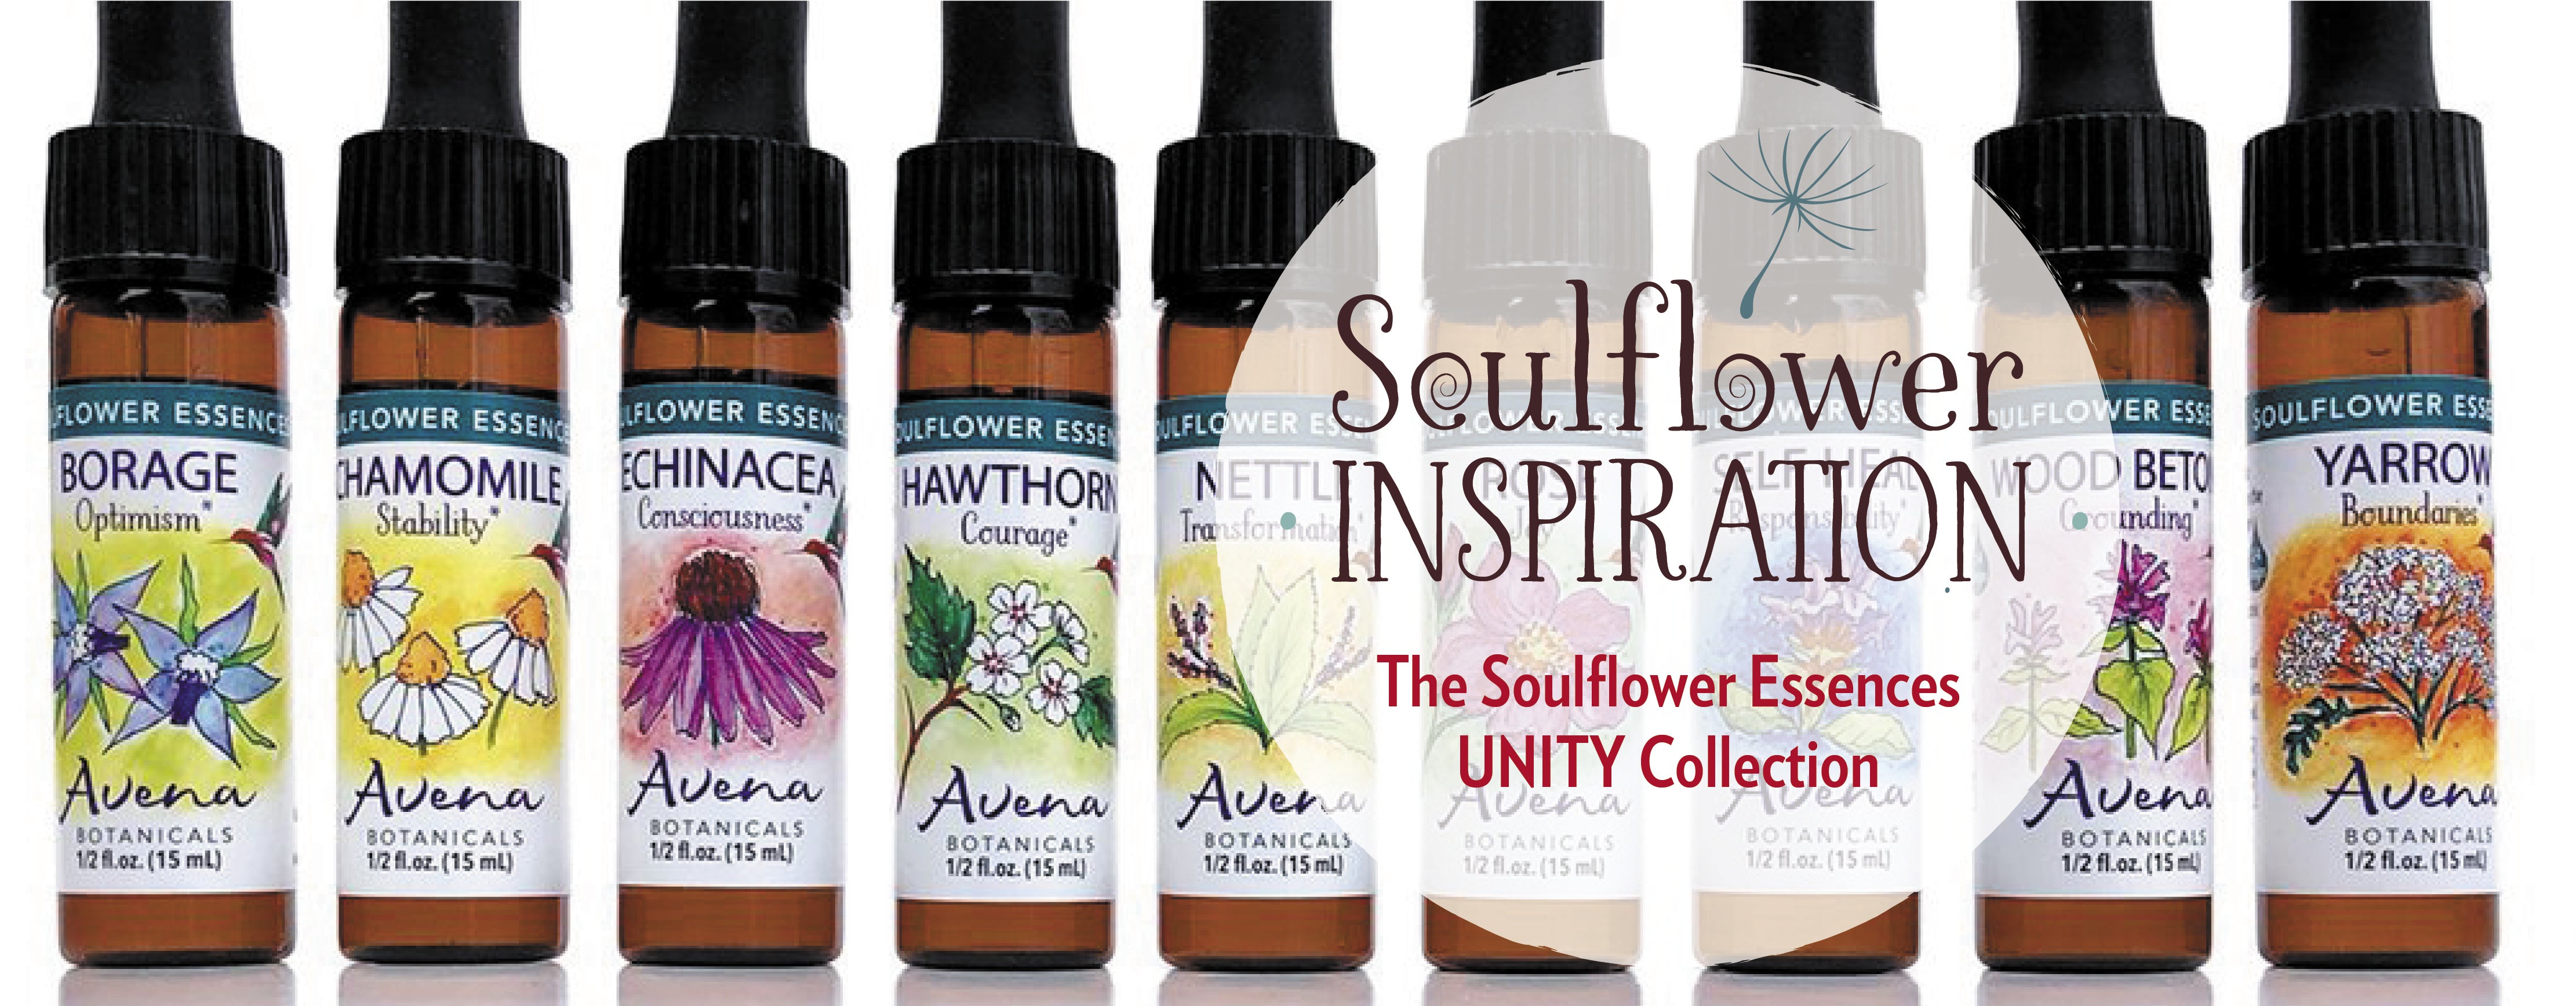 A Journey with the Soulflowers!